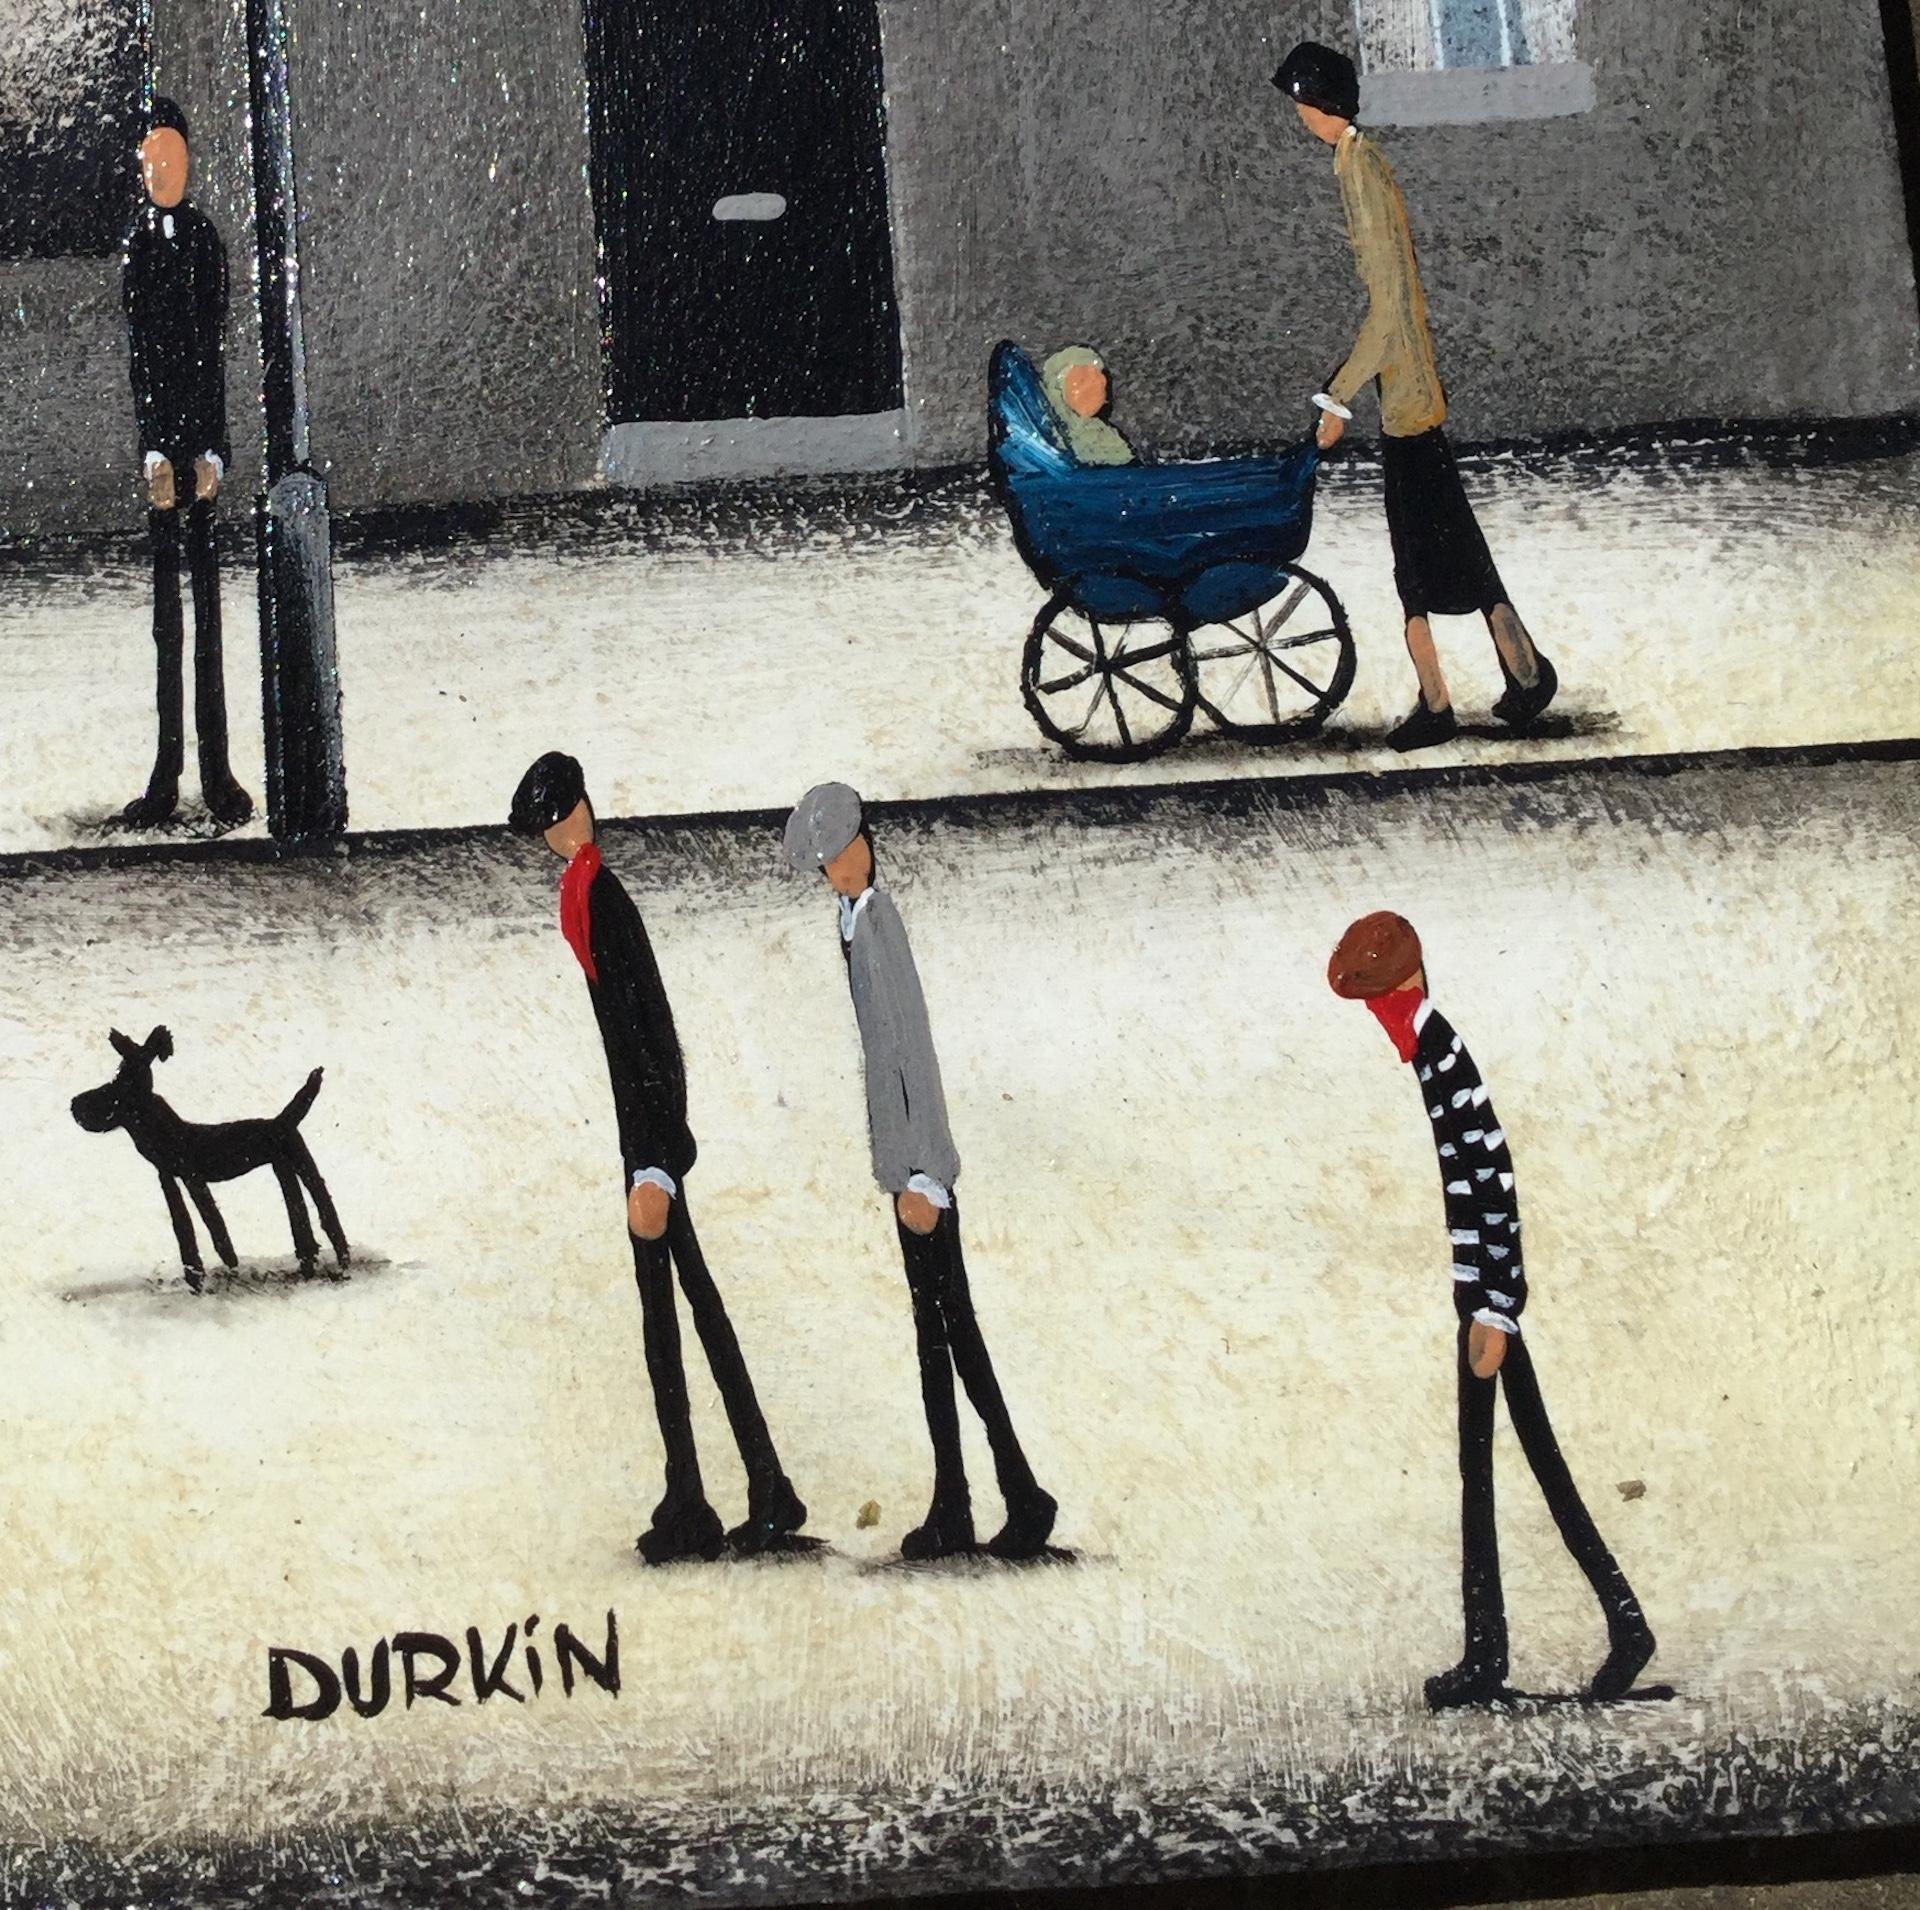 Sean Durkin, Bustling High Street, Contemporary Lowry -esque Figurative Painting 3